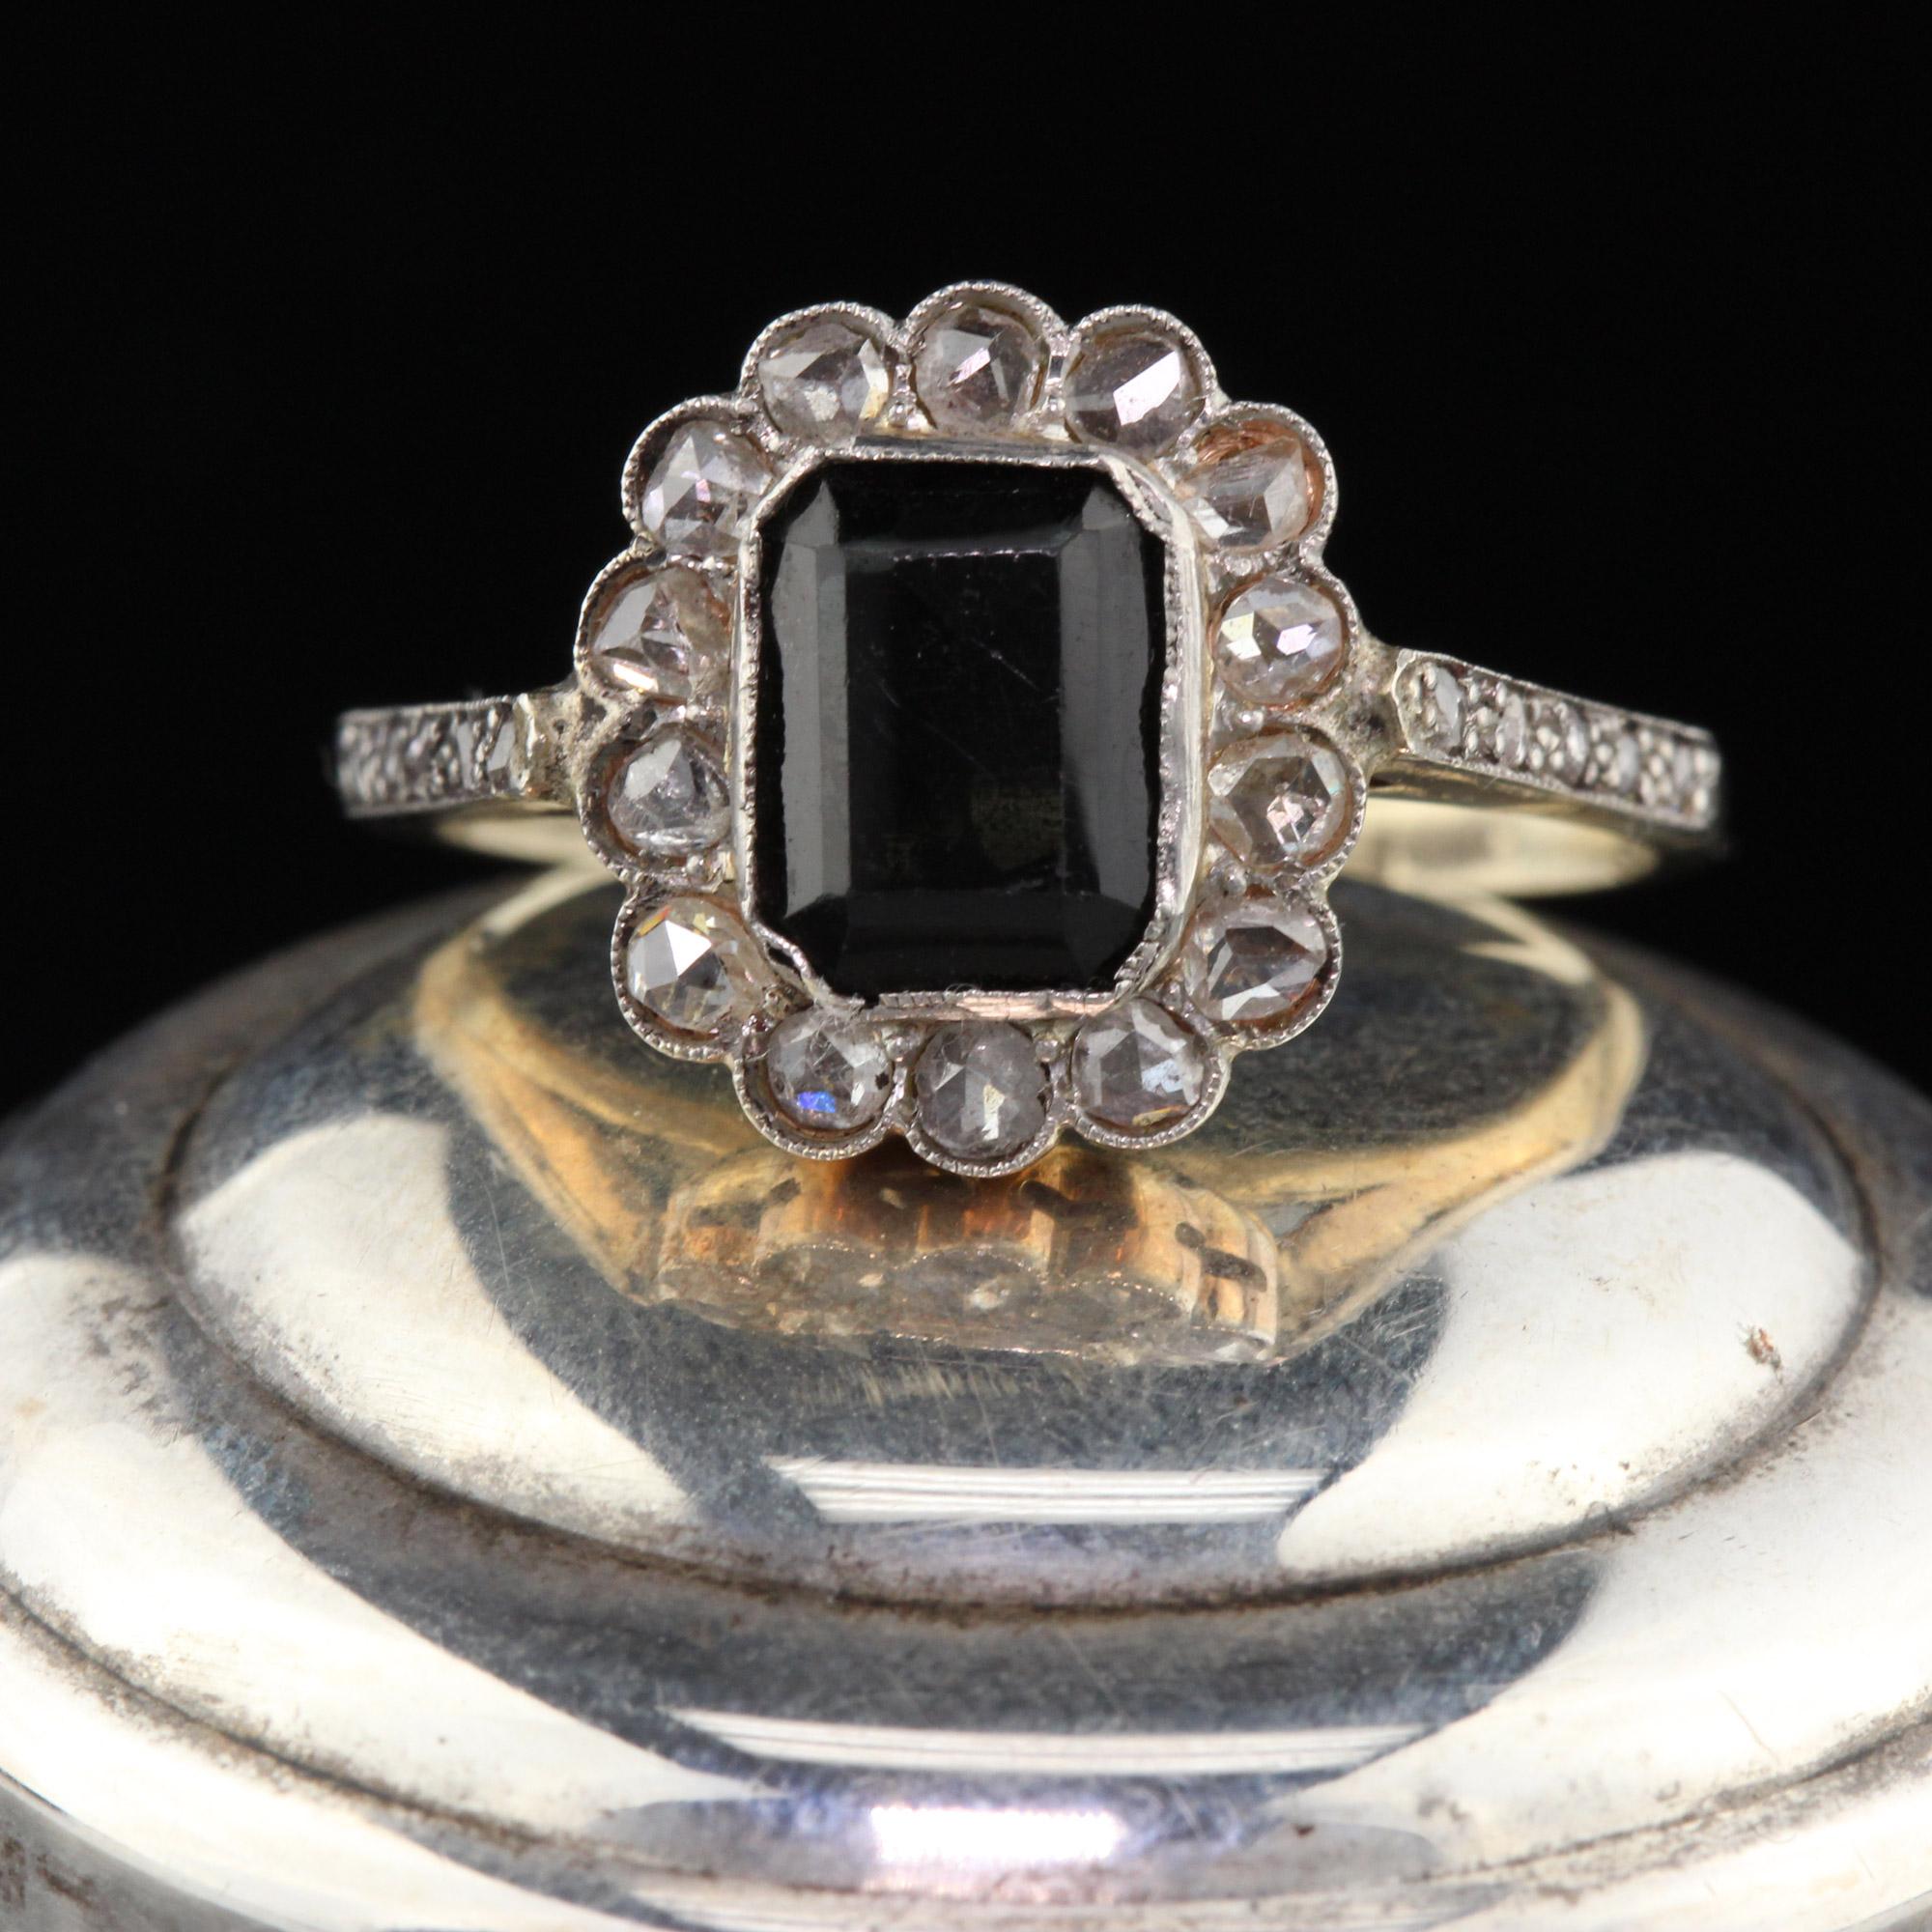 This antique cluster ring features a rectangular dark blue sapphire surrounded by a halo of rose cut diamonds.

#R0080

Metal: 14K Yellow Gold 

Weight: 3.5 grams

Ring Size: 7 3/4

This ring can be sized for a $30 fee!

*Please note we cannot